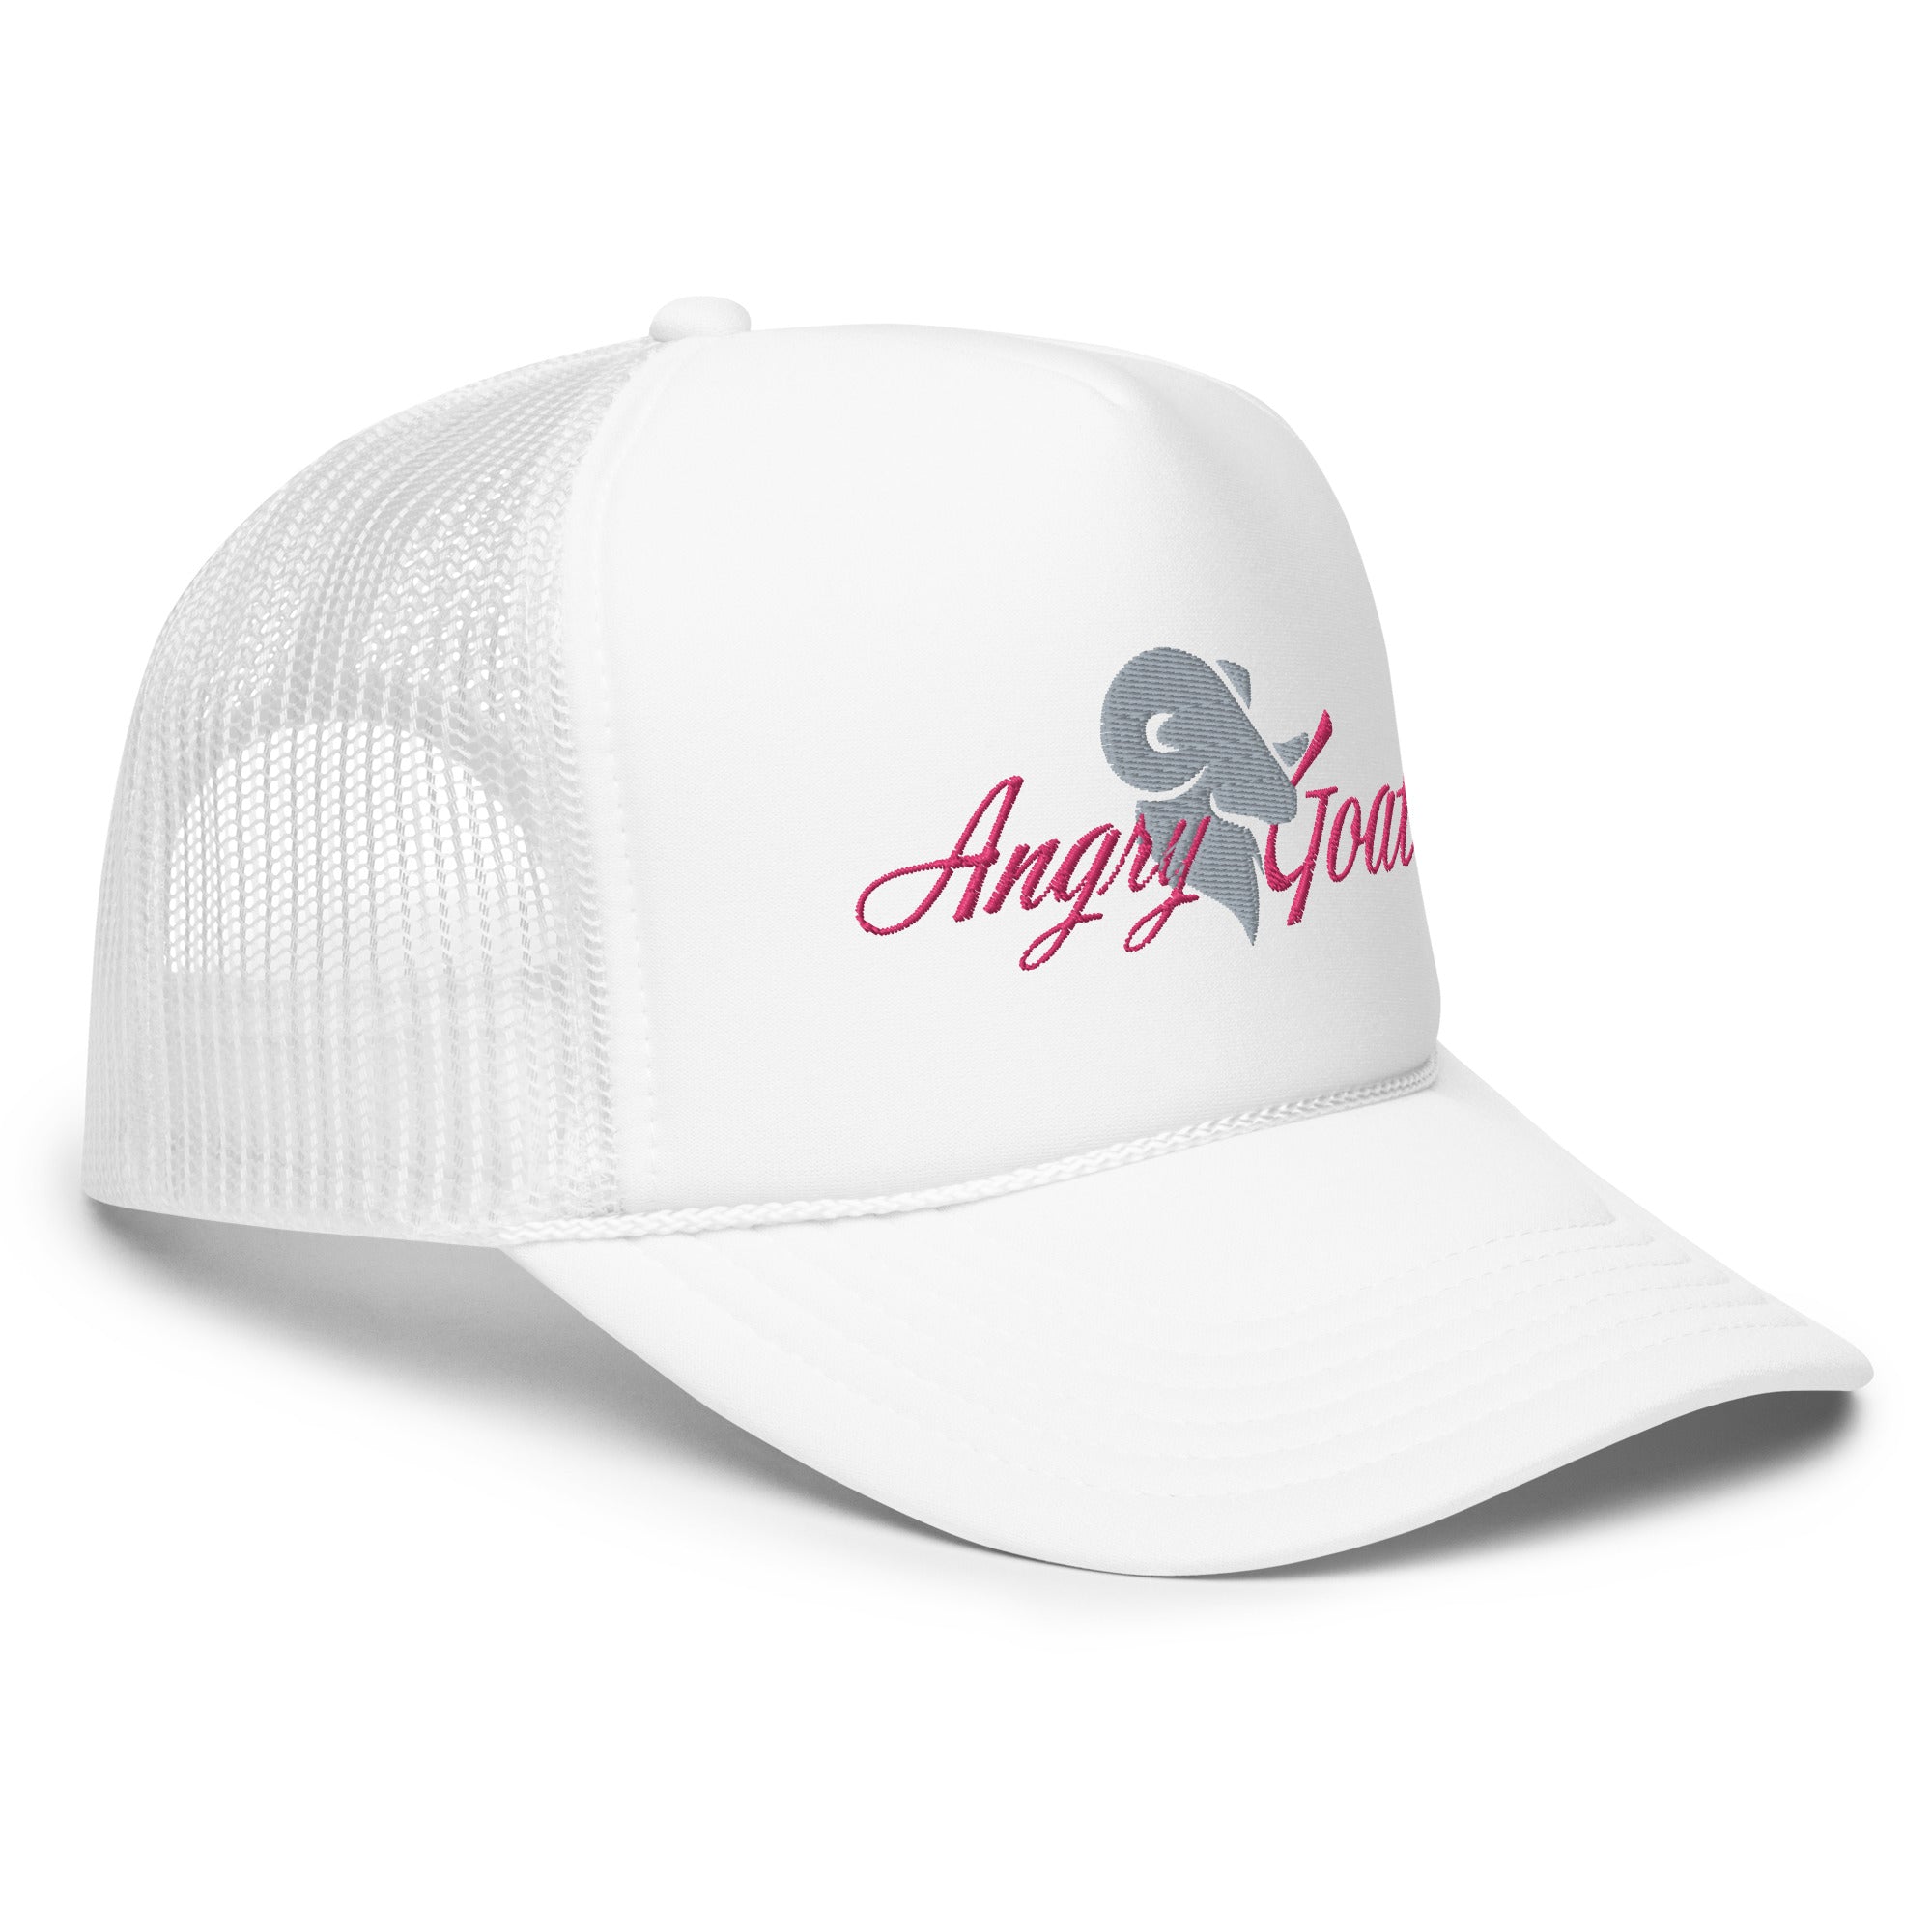 Angry Goat  trucker hat